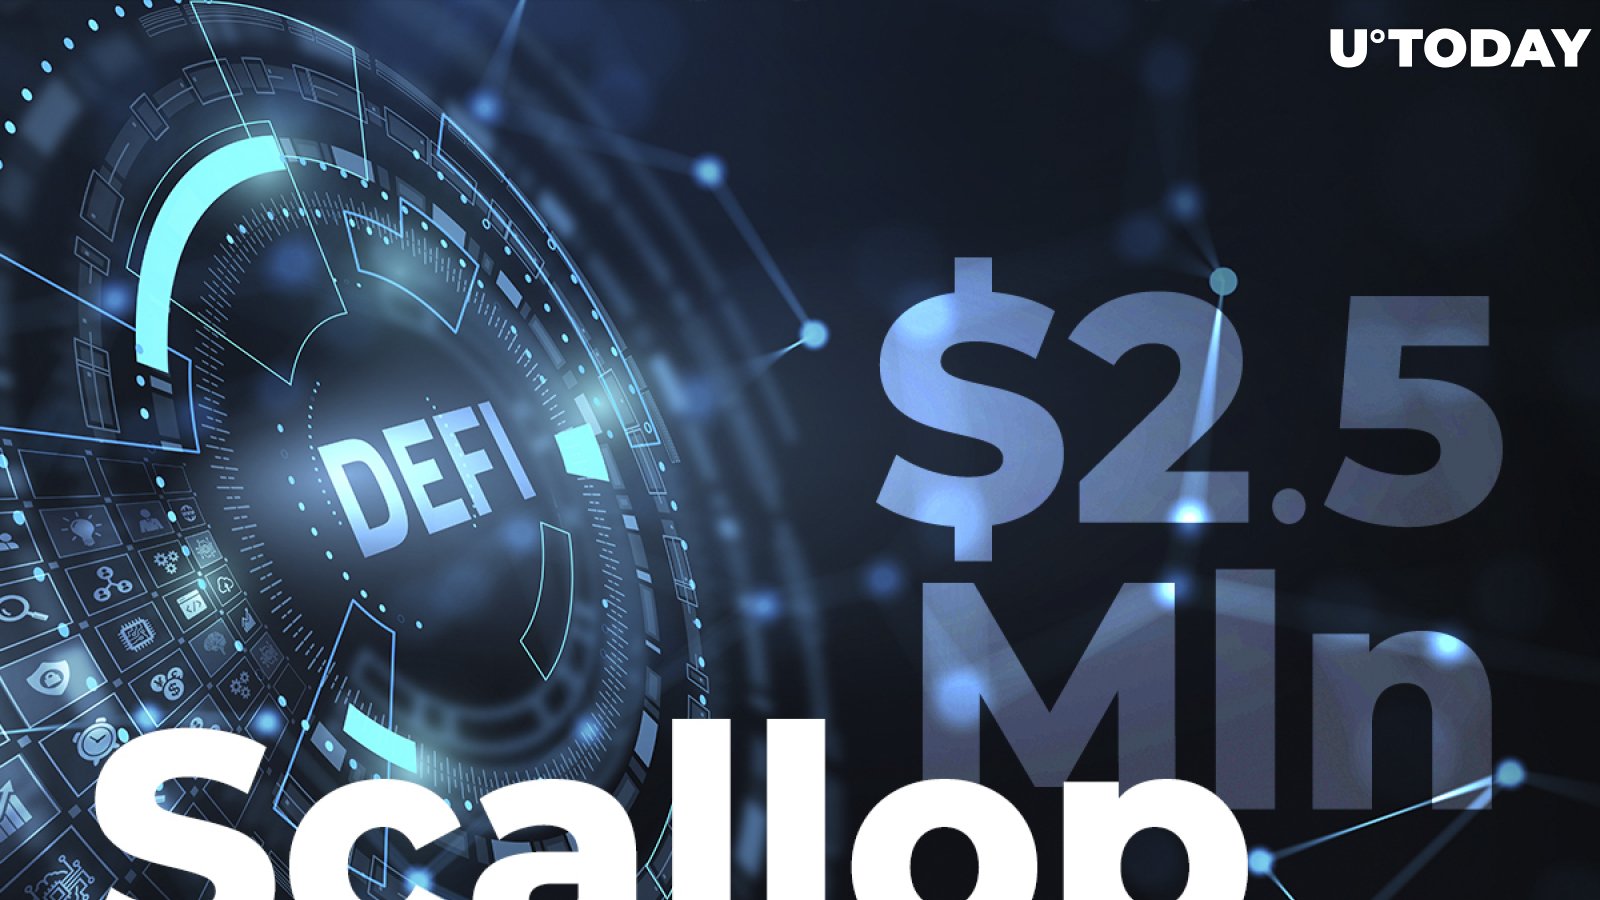 DeFi App Scallop Set to Secure $2.5 Million in Funding from Top VCs